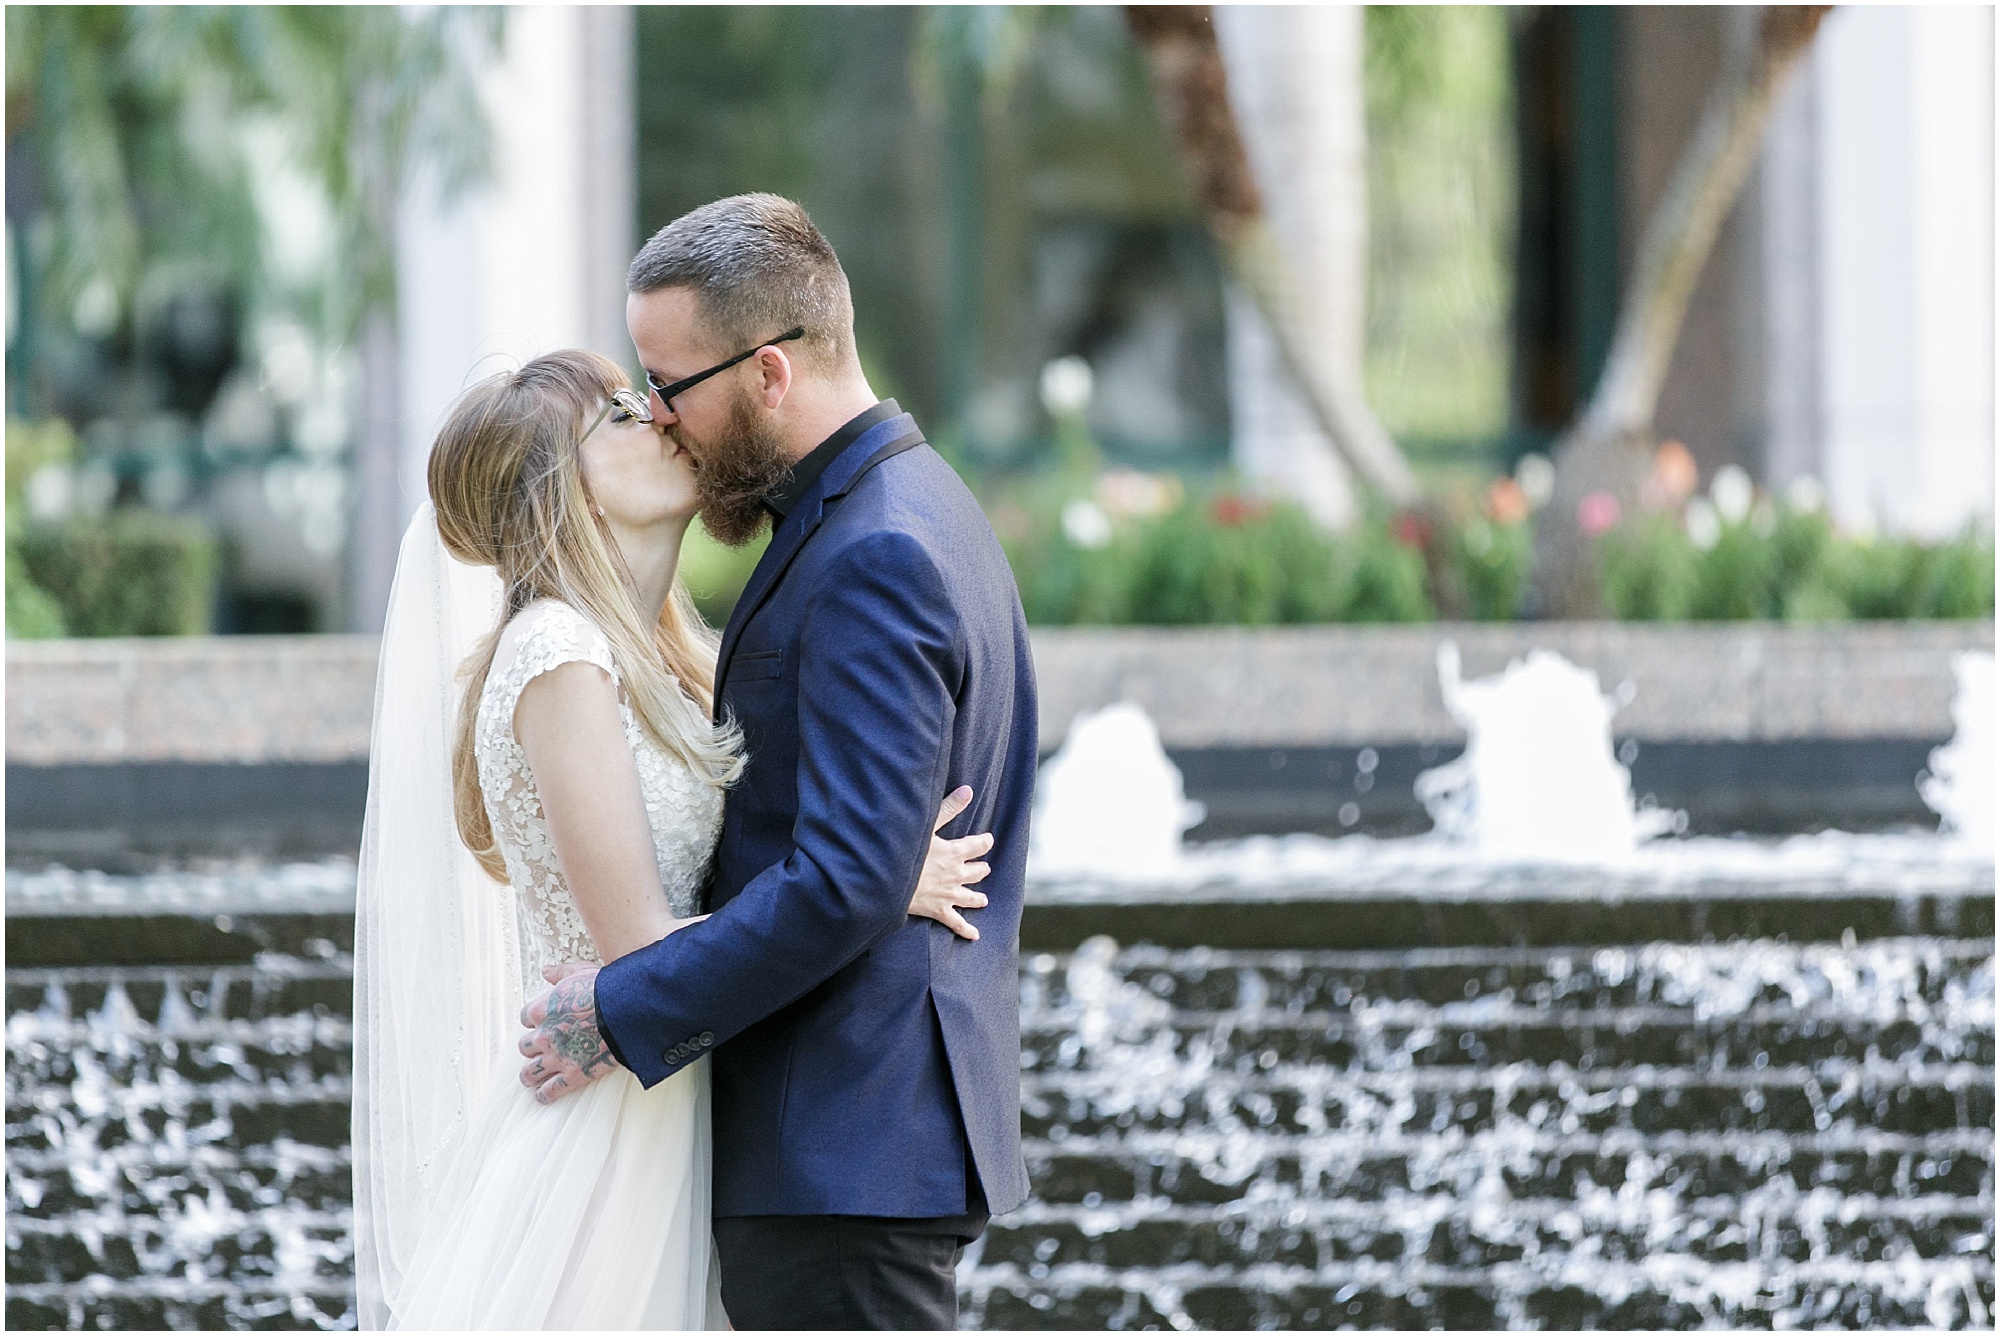 Bride and groom kissing while standing in front of a fountain.